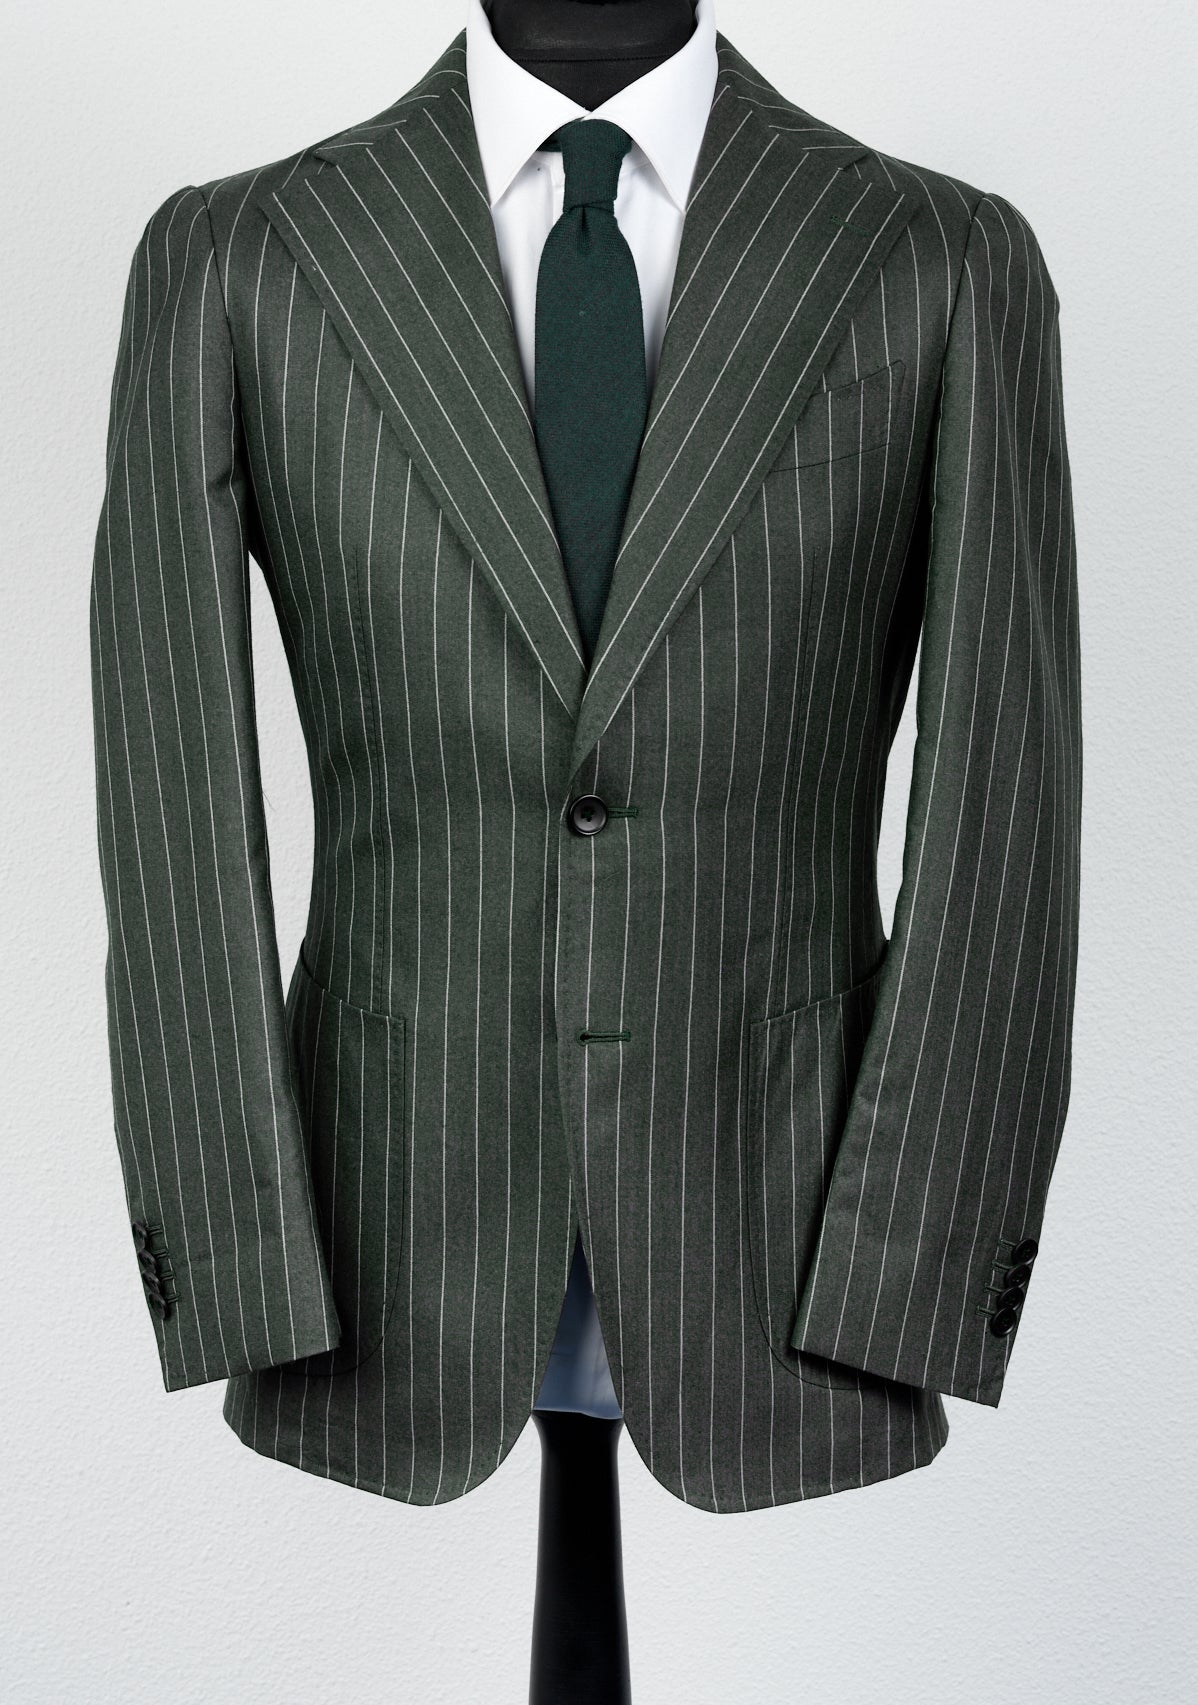 New Suitsupply Havana Wide Lapel Green Pinstripe Wool and Mulberry Silk Suit - Size 38R